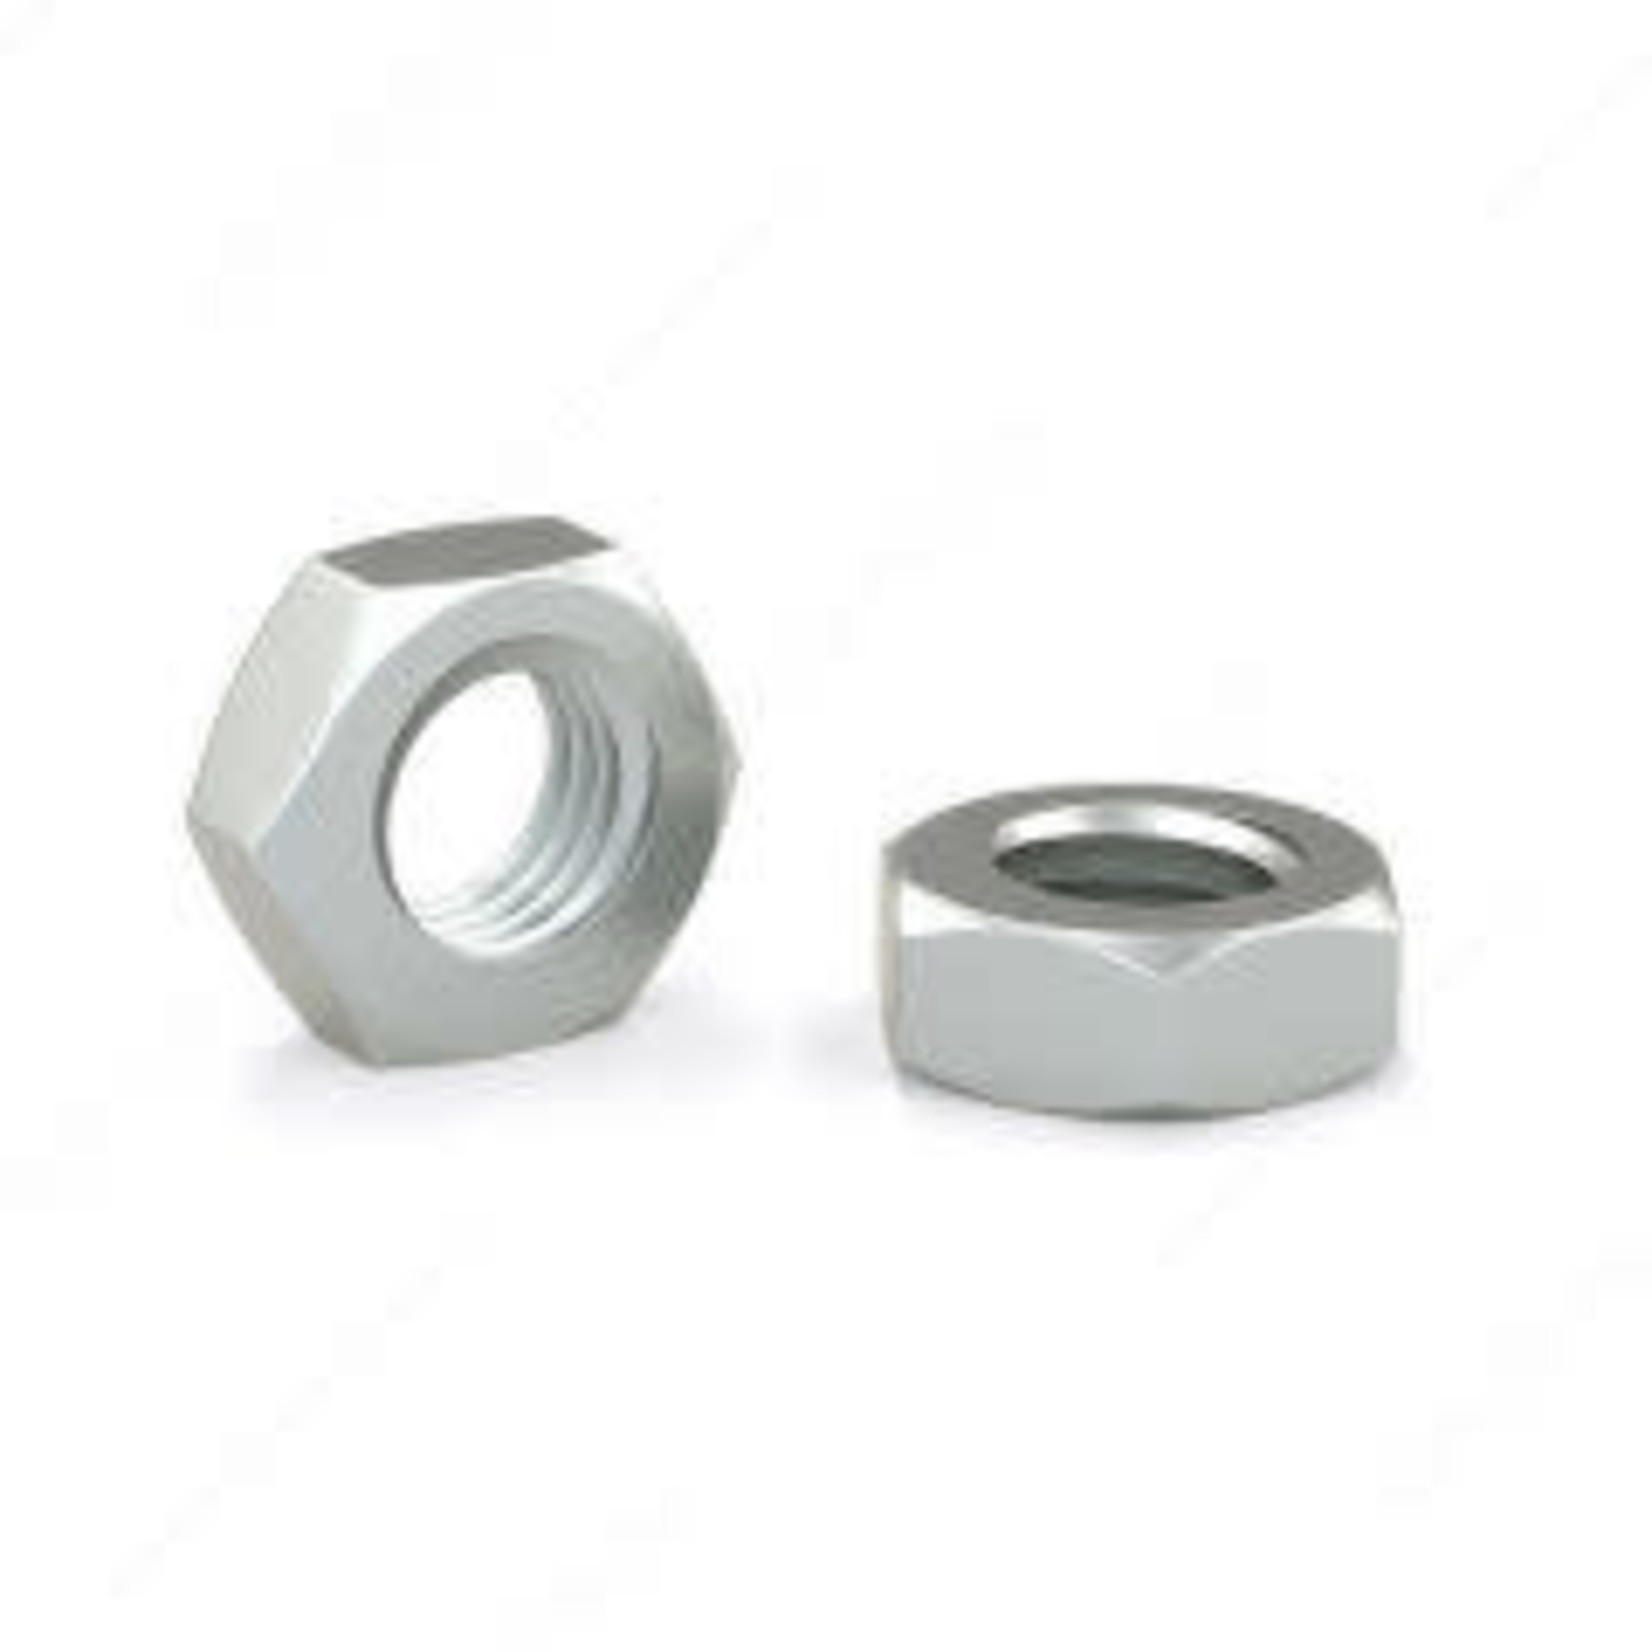 RELIABLE HEXAGON NUTS, 8-32, 18PK BLISTER